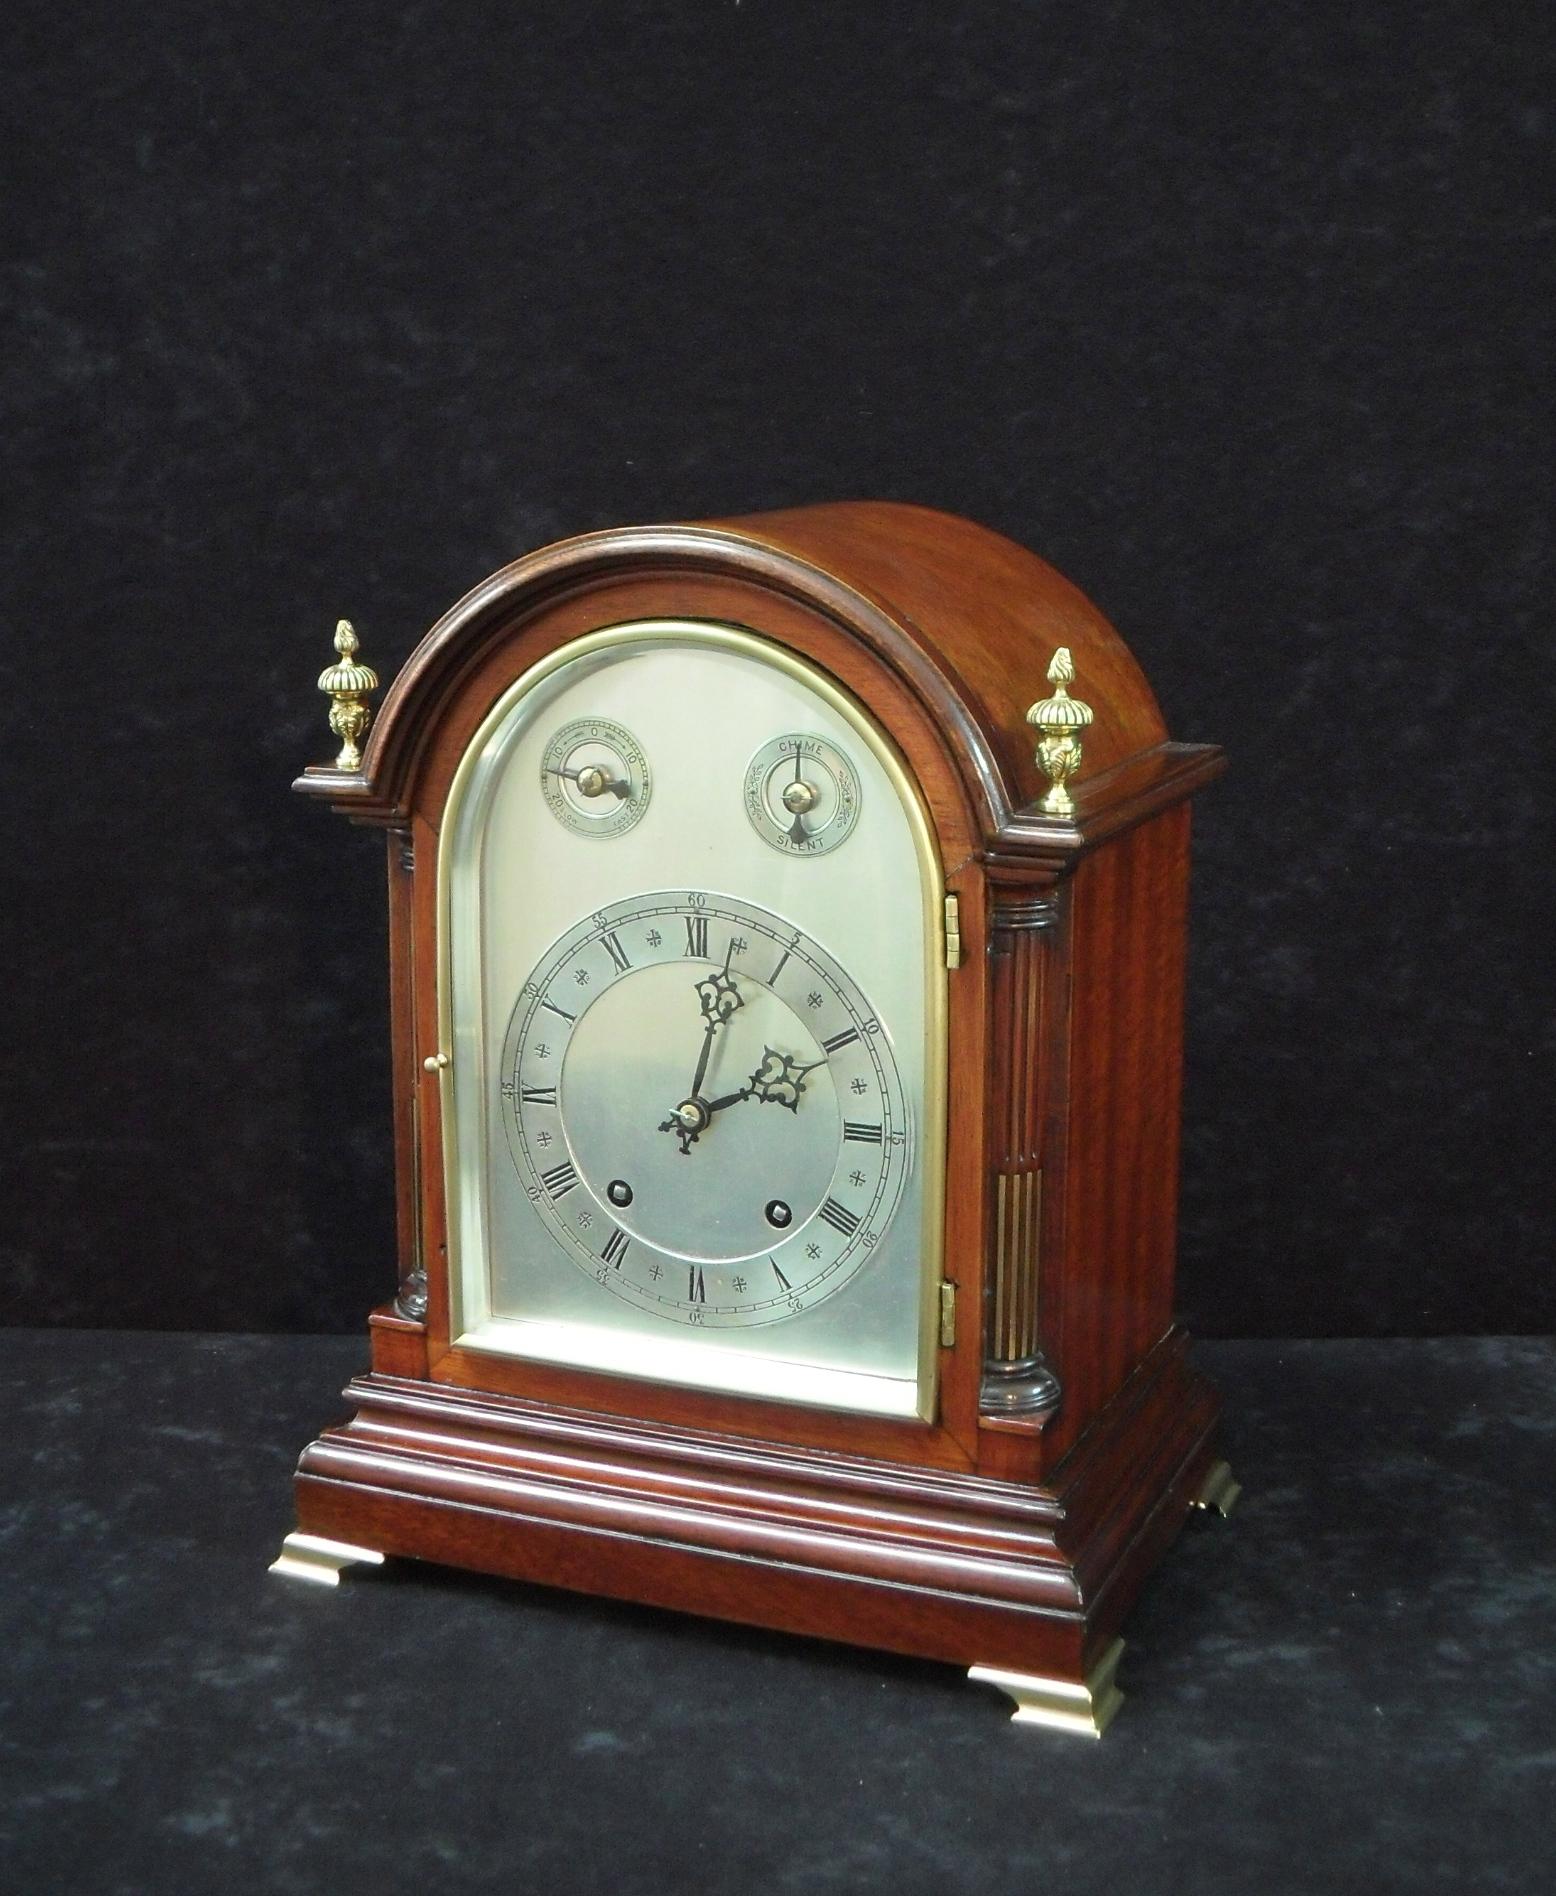 A very good quality late Victorian mahogany arched top bracket or table clock with quarter columns and brass string inlay. The clock has a silvered dial with slow-fast and silent-strike mechanism. The clock has a German Winterhalder & Hofmeier ting